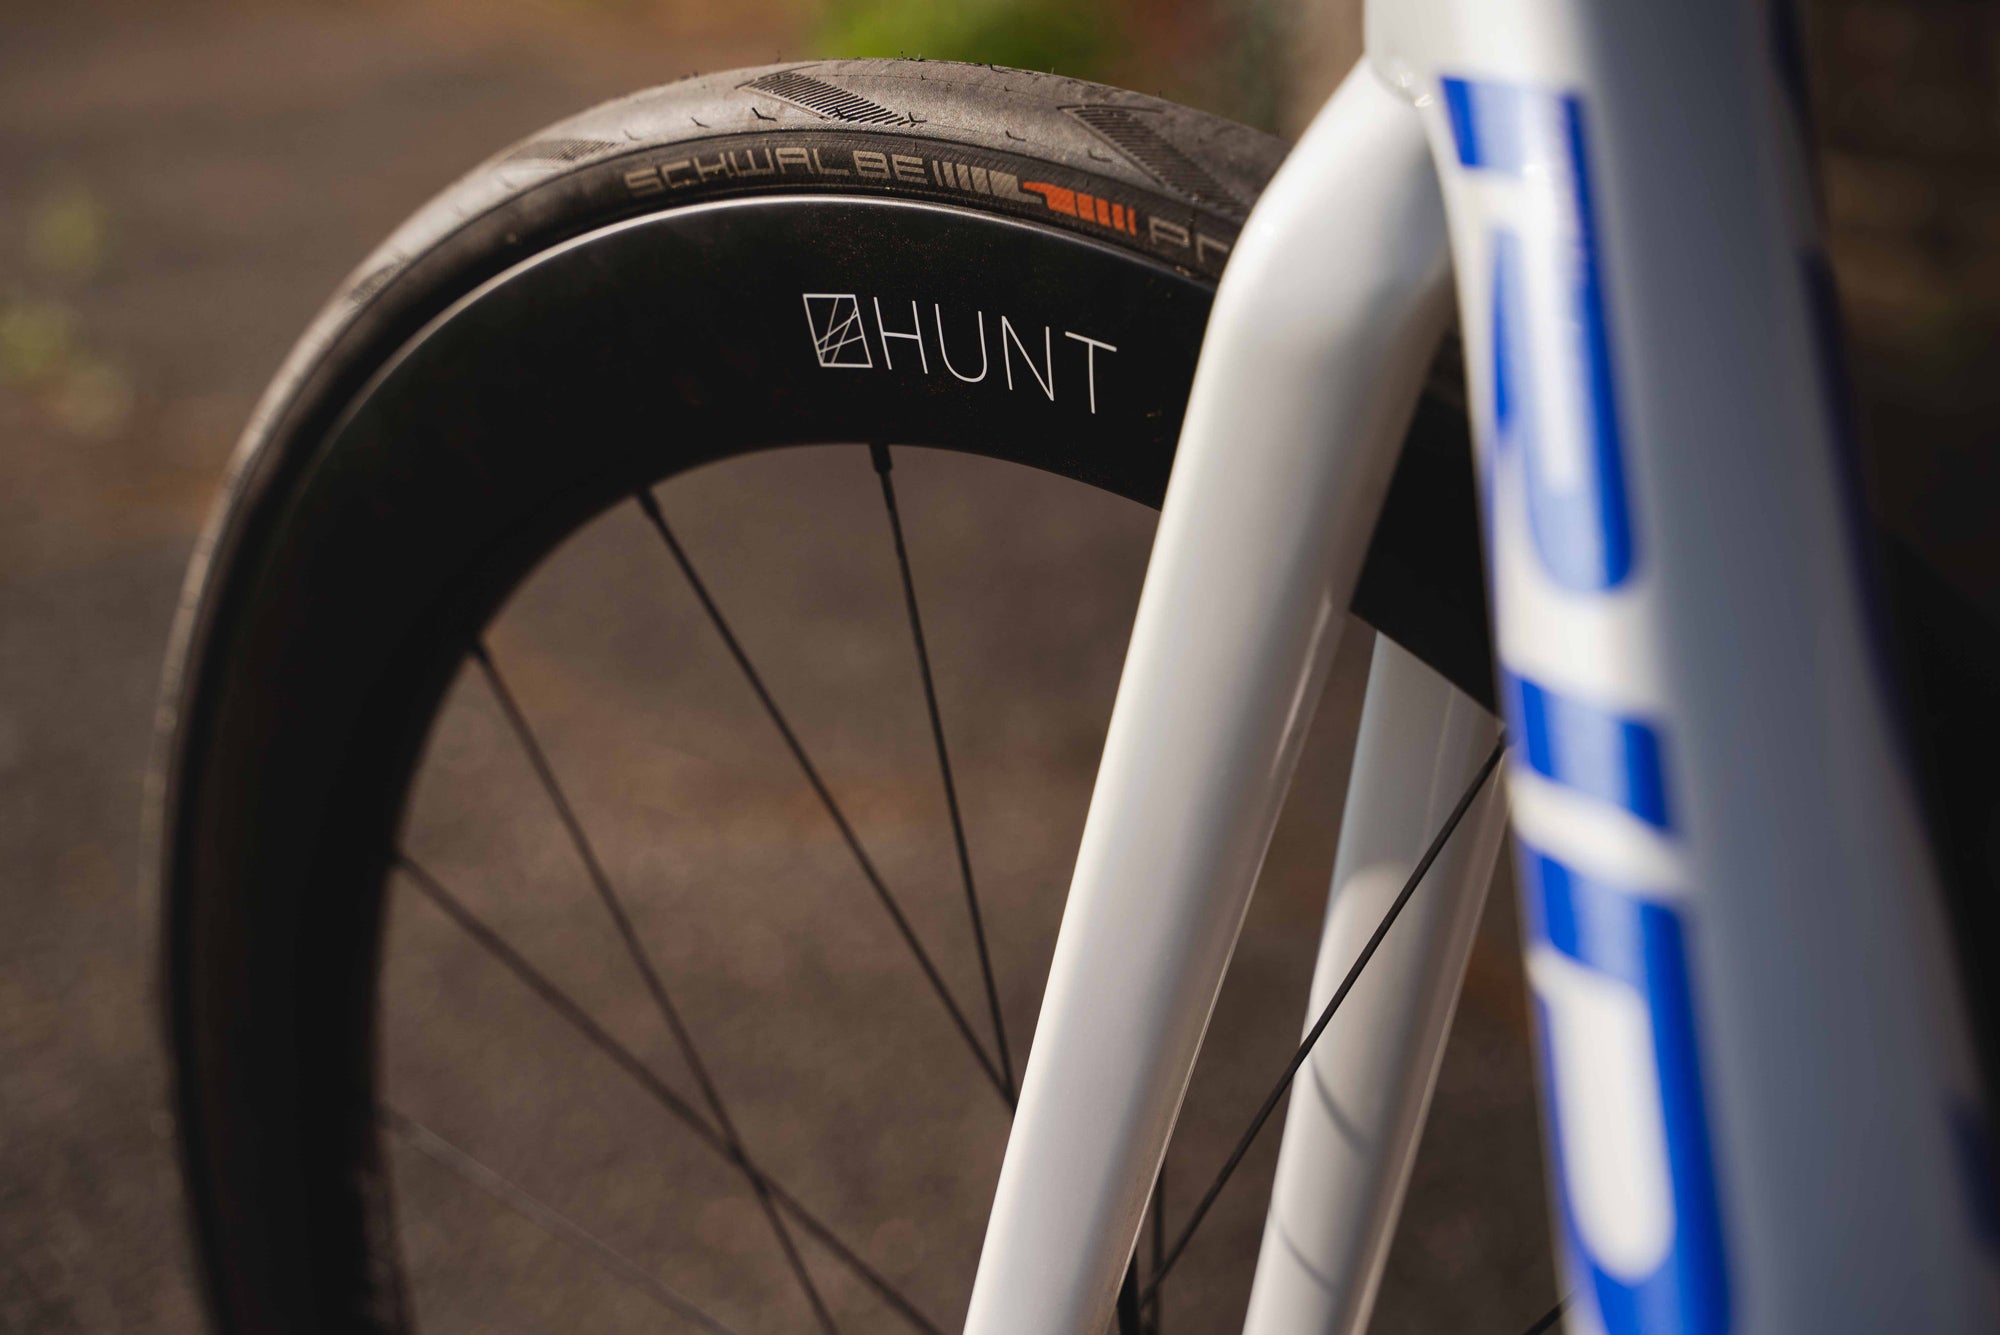 <h1>Tyre Width Optimisation</h1><i> Designed around a 20mm internal rim width optimised for a 25c tyre (but will of course work without compromise with both 23c and 28c tyres). They feature a hooked tyre retention design and are both fully ETRTO-compatible and tubeless-ready.</i>